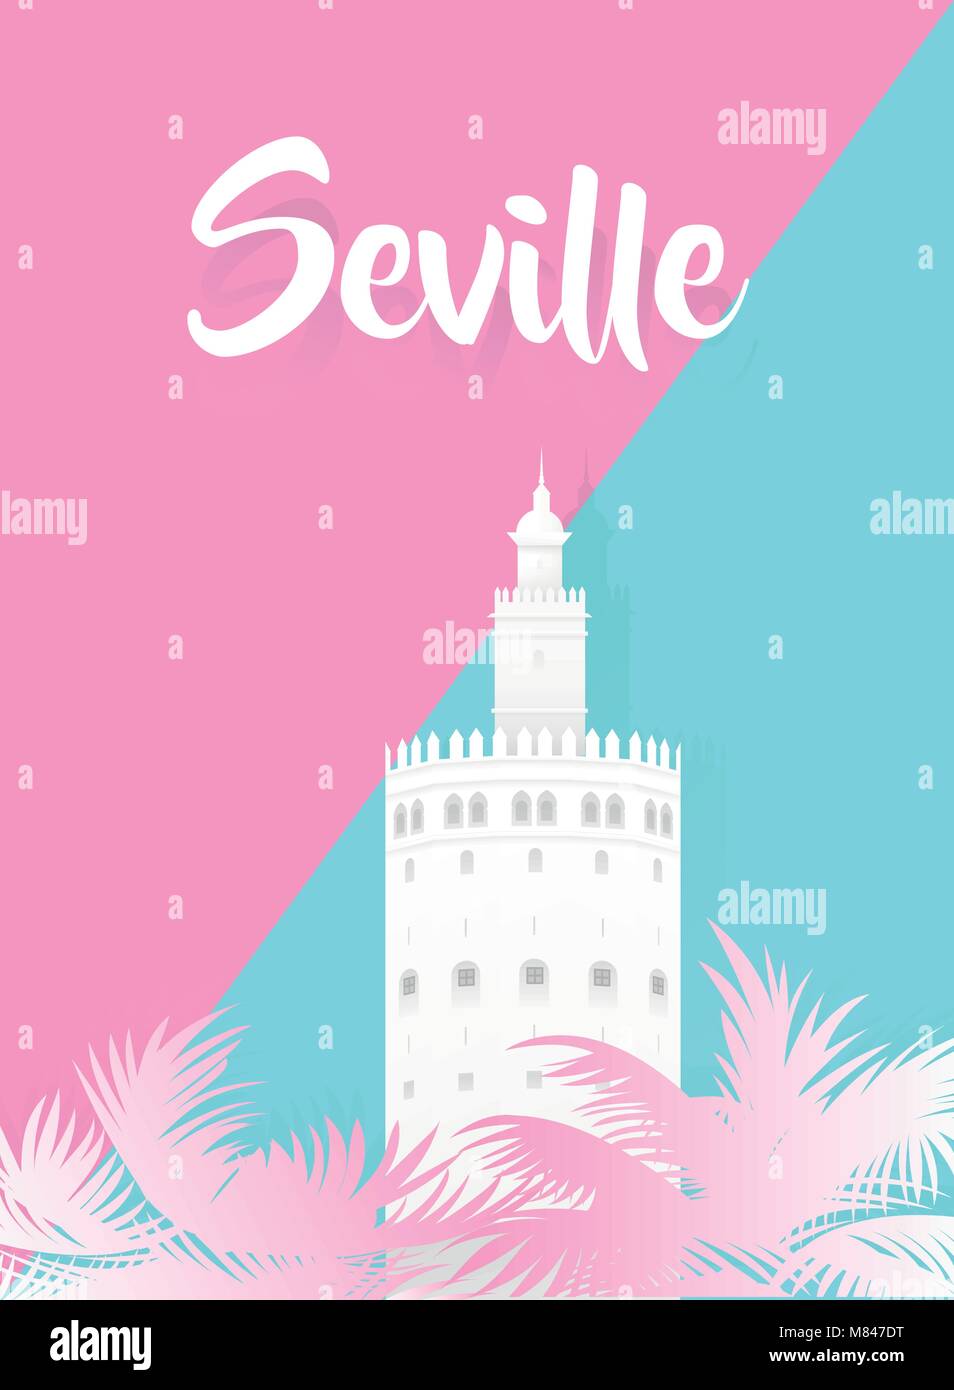 Illustration of the gold tower with the word seville written. Stock Vector